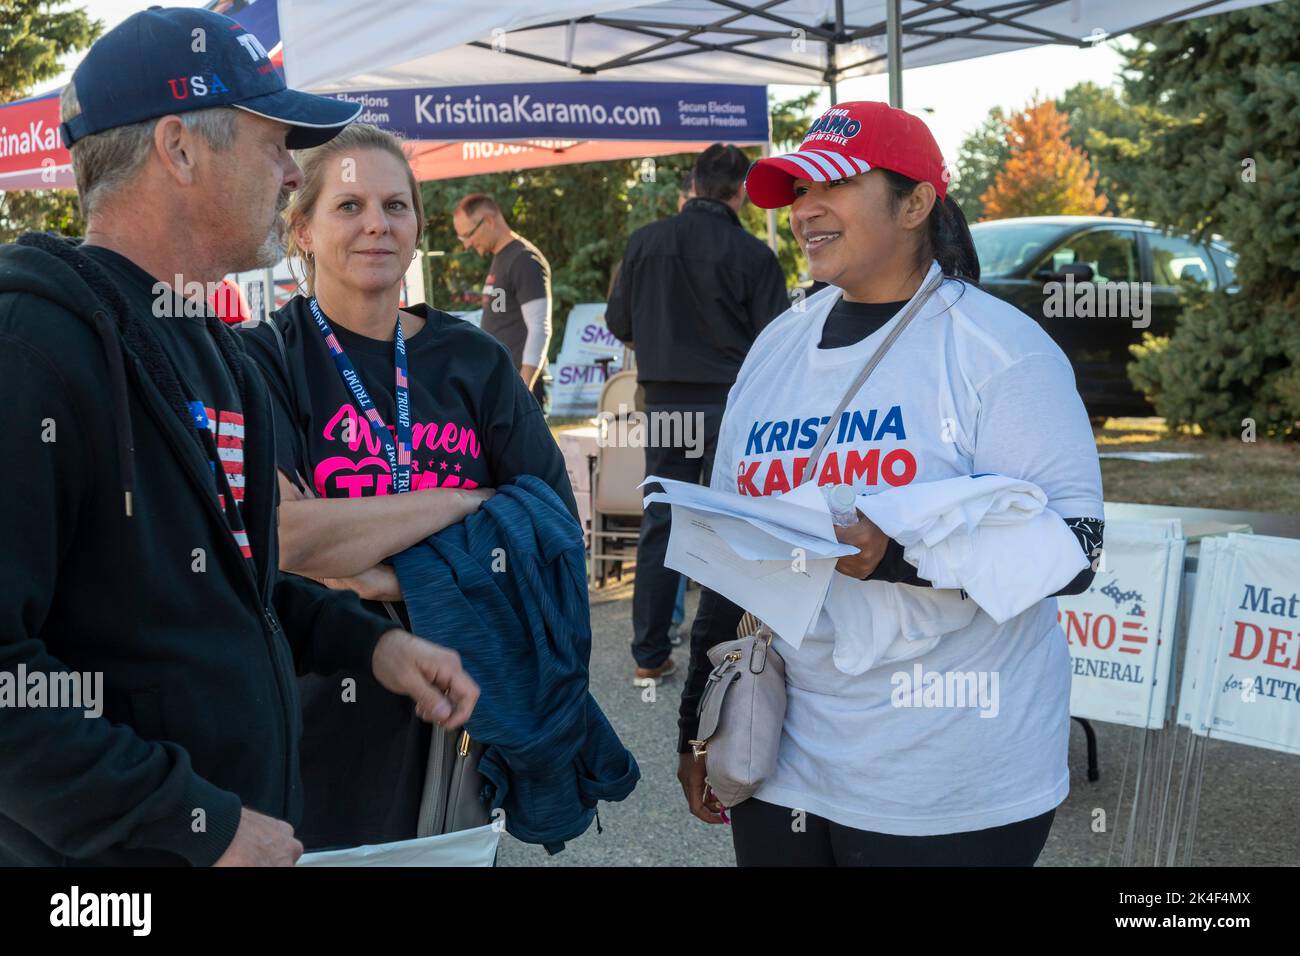 Warren, Michigan, USA. 1st Oct, 2022. Michele Haroon, a volunteer supporting Kristina Karamo, who is the Republican candidate for Michigan Secretary of State, talks with people arriving for a Donald Trump rally. Trump is supporting Tudor Dixon, Matt DePerno, and Kristina Karamo, Republican candidates for (respectively) Michigan governor, attorney general, and secretary of state. Credit: Jim West/Alamy Live News Stock Photo